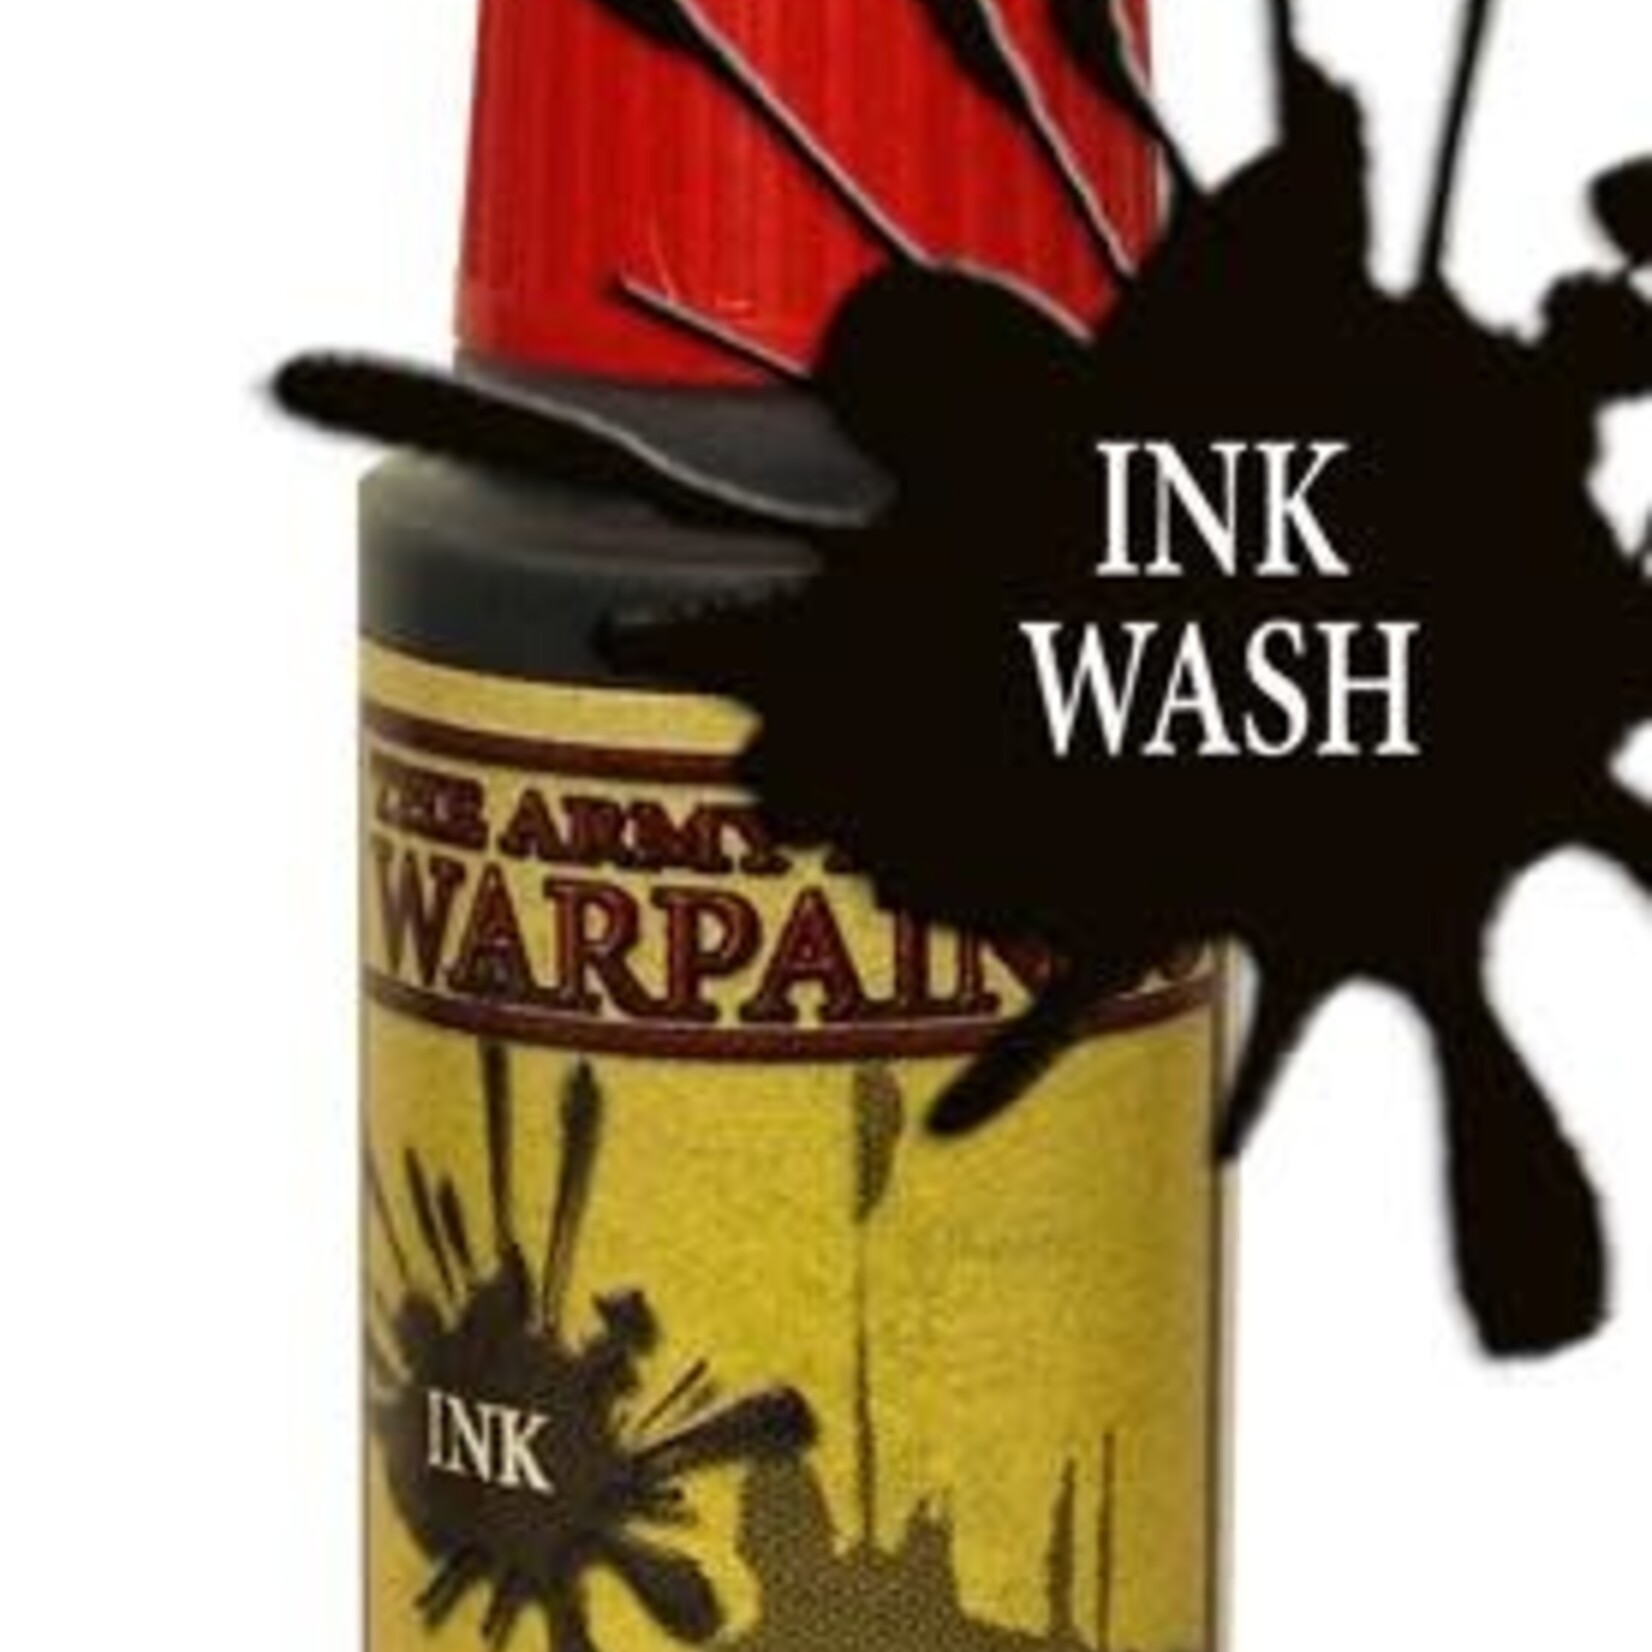 The Army Painter Warpaints Quick Shade: Dark Tone Ink 18ml